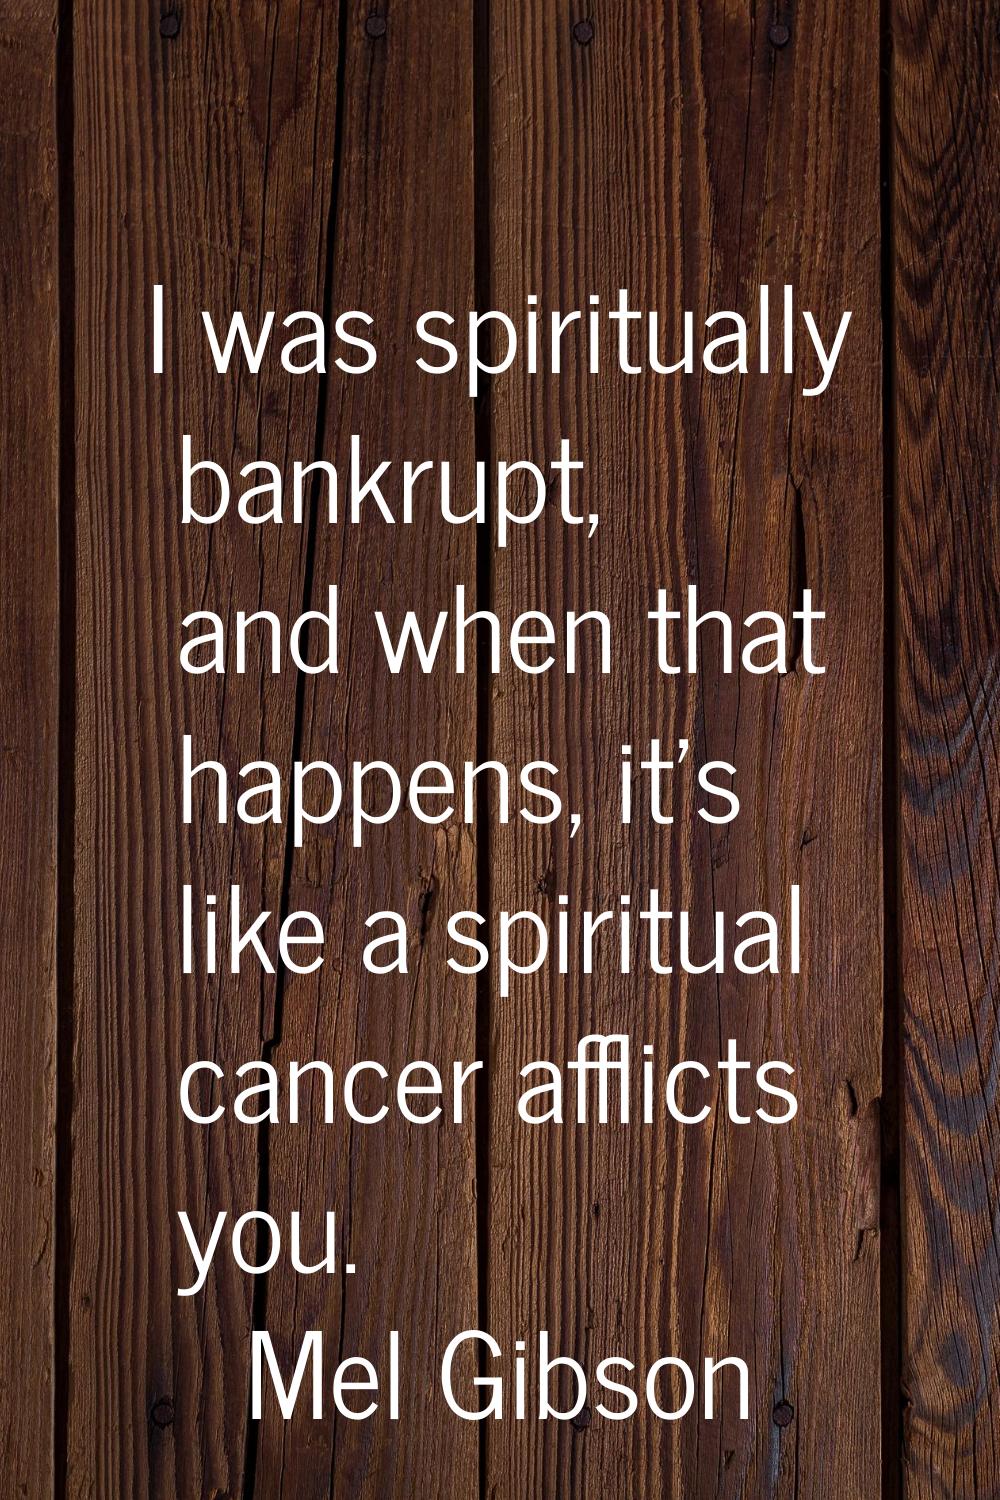 I was spiritually bankrupt, and when that happens, it's like a spiritual cancer afflicts you.